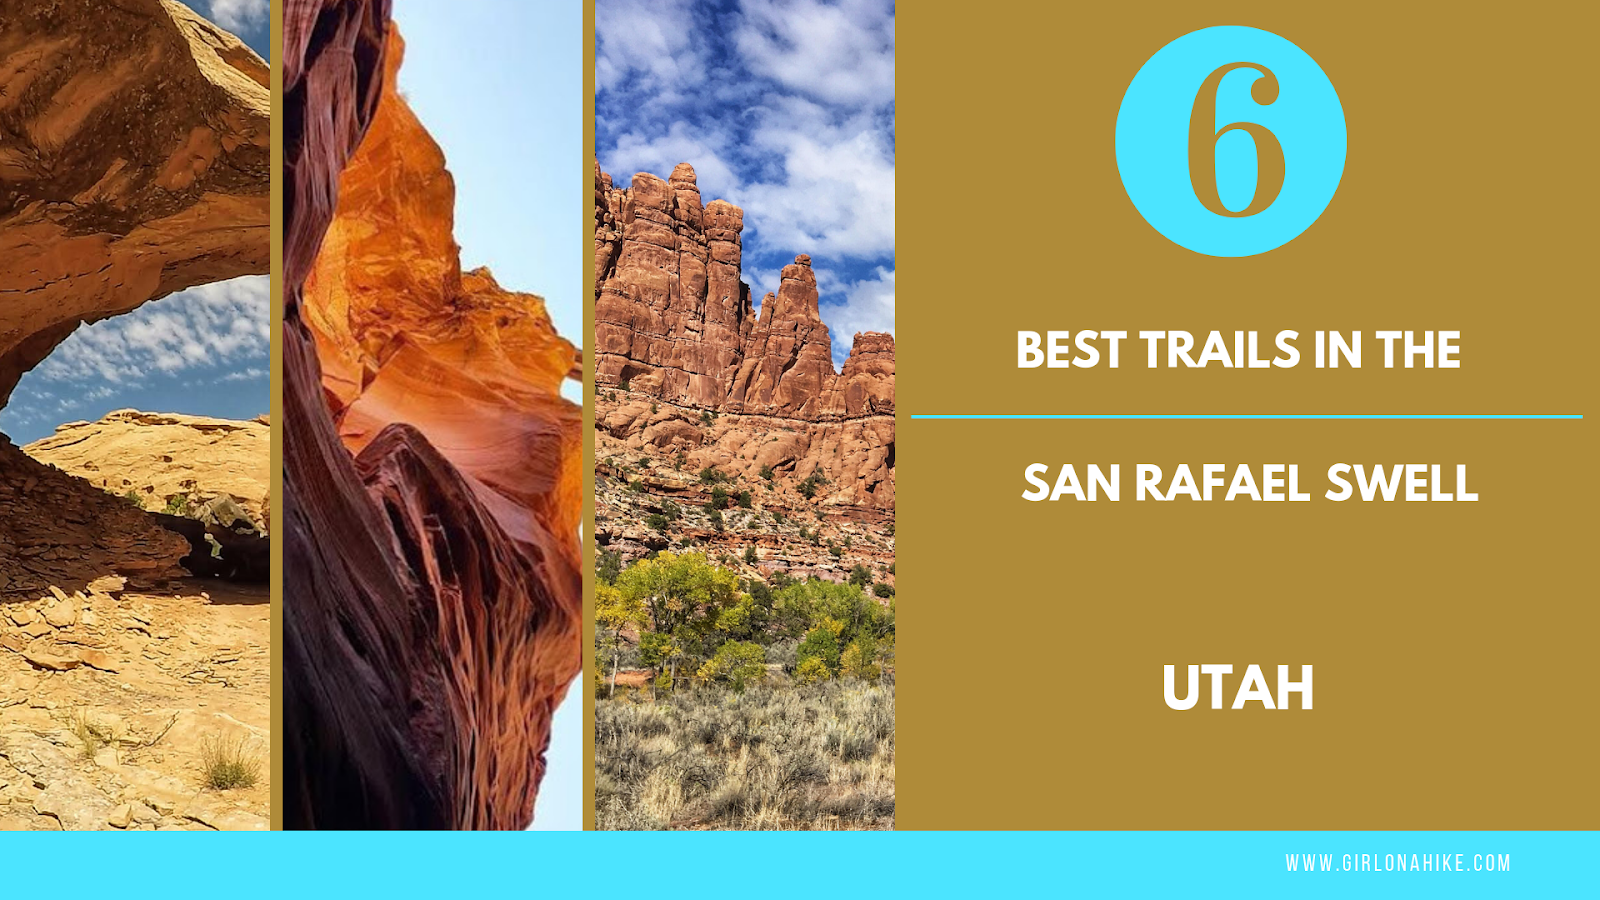 The 6 Best Trails in the San Rafael Swell